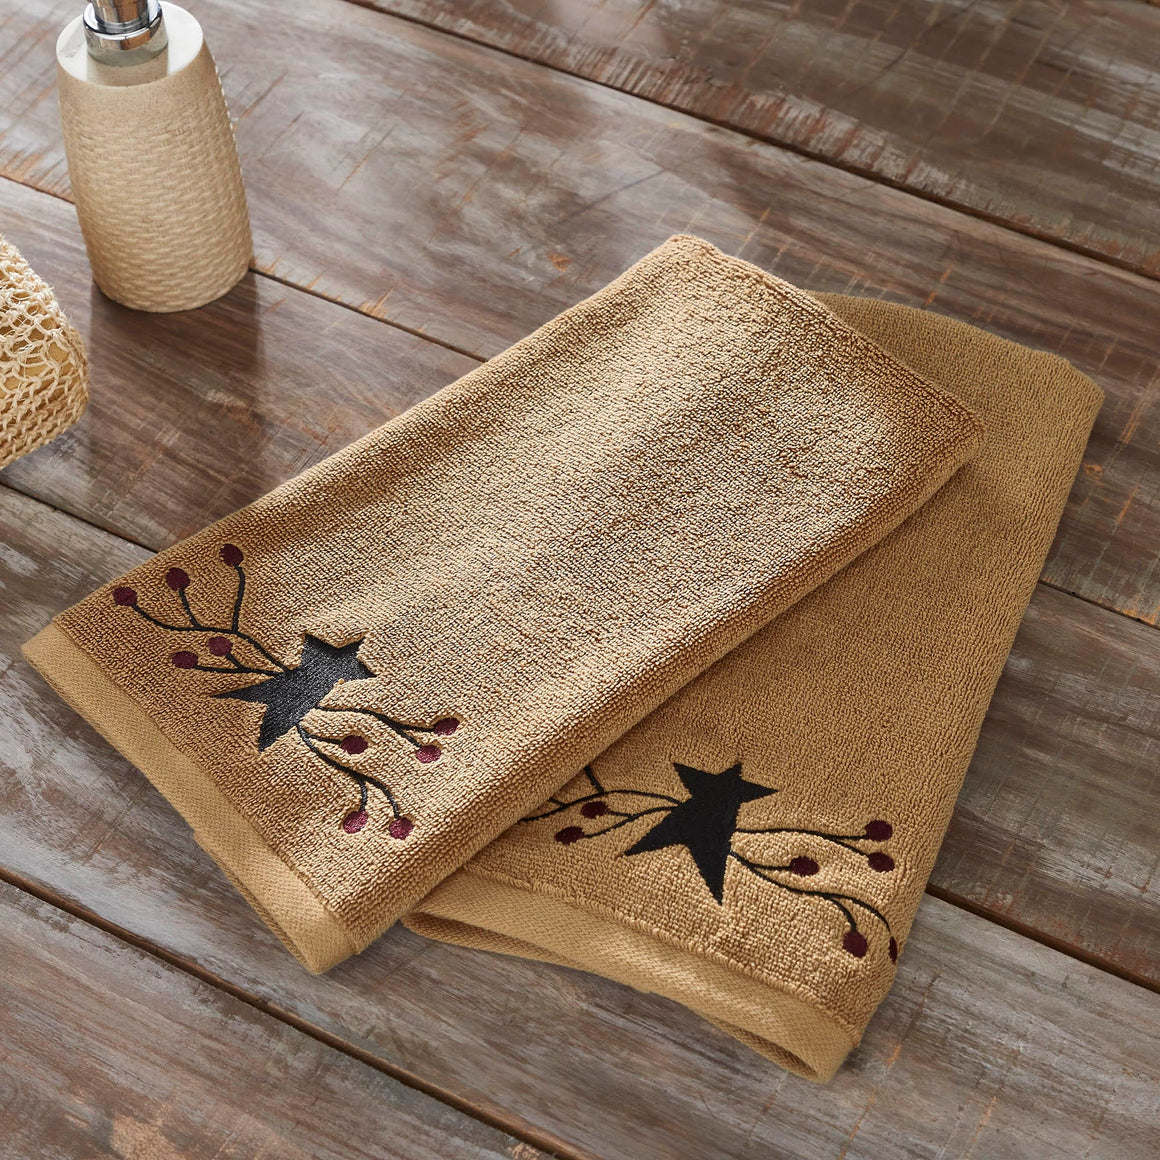 Pip Vinestar Embroidered Hand Towel Set of 2